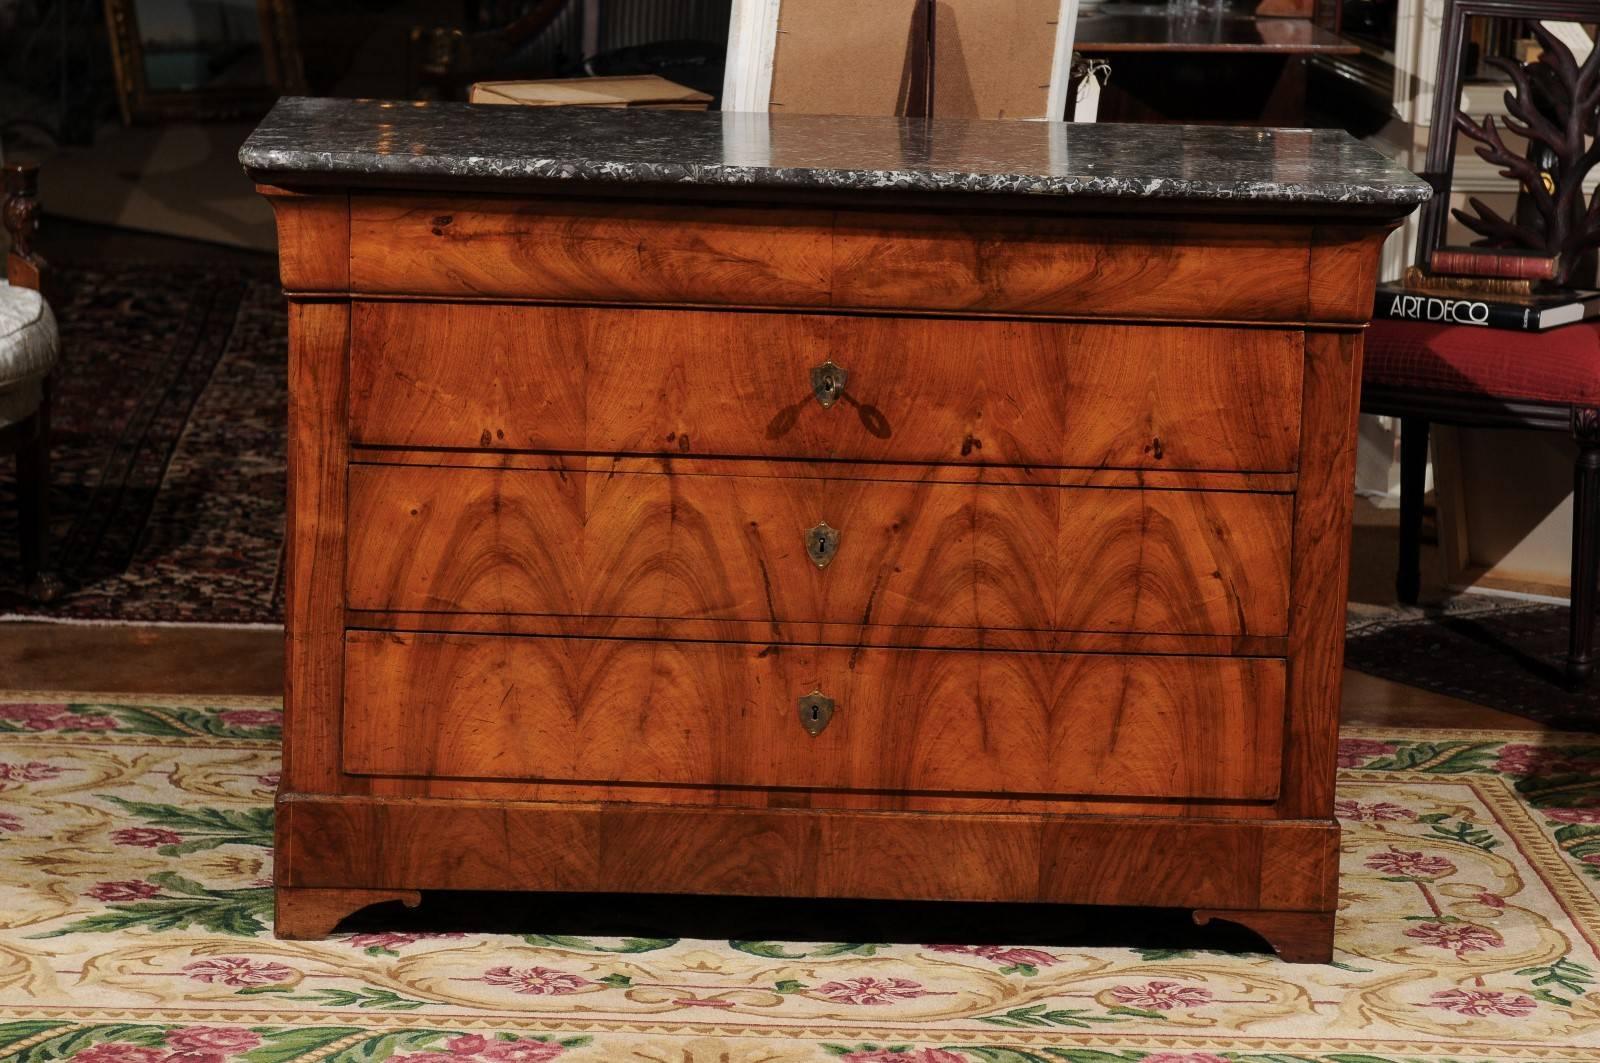 A large bookmatched burled walnut French Louis Philippe commode with a marble top. Three drawers with brass escutcheons for key entry. The wood is gorgeous and would be a statement in any room.